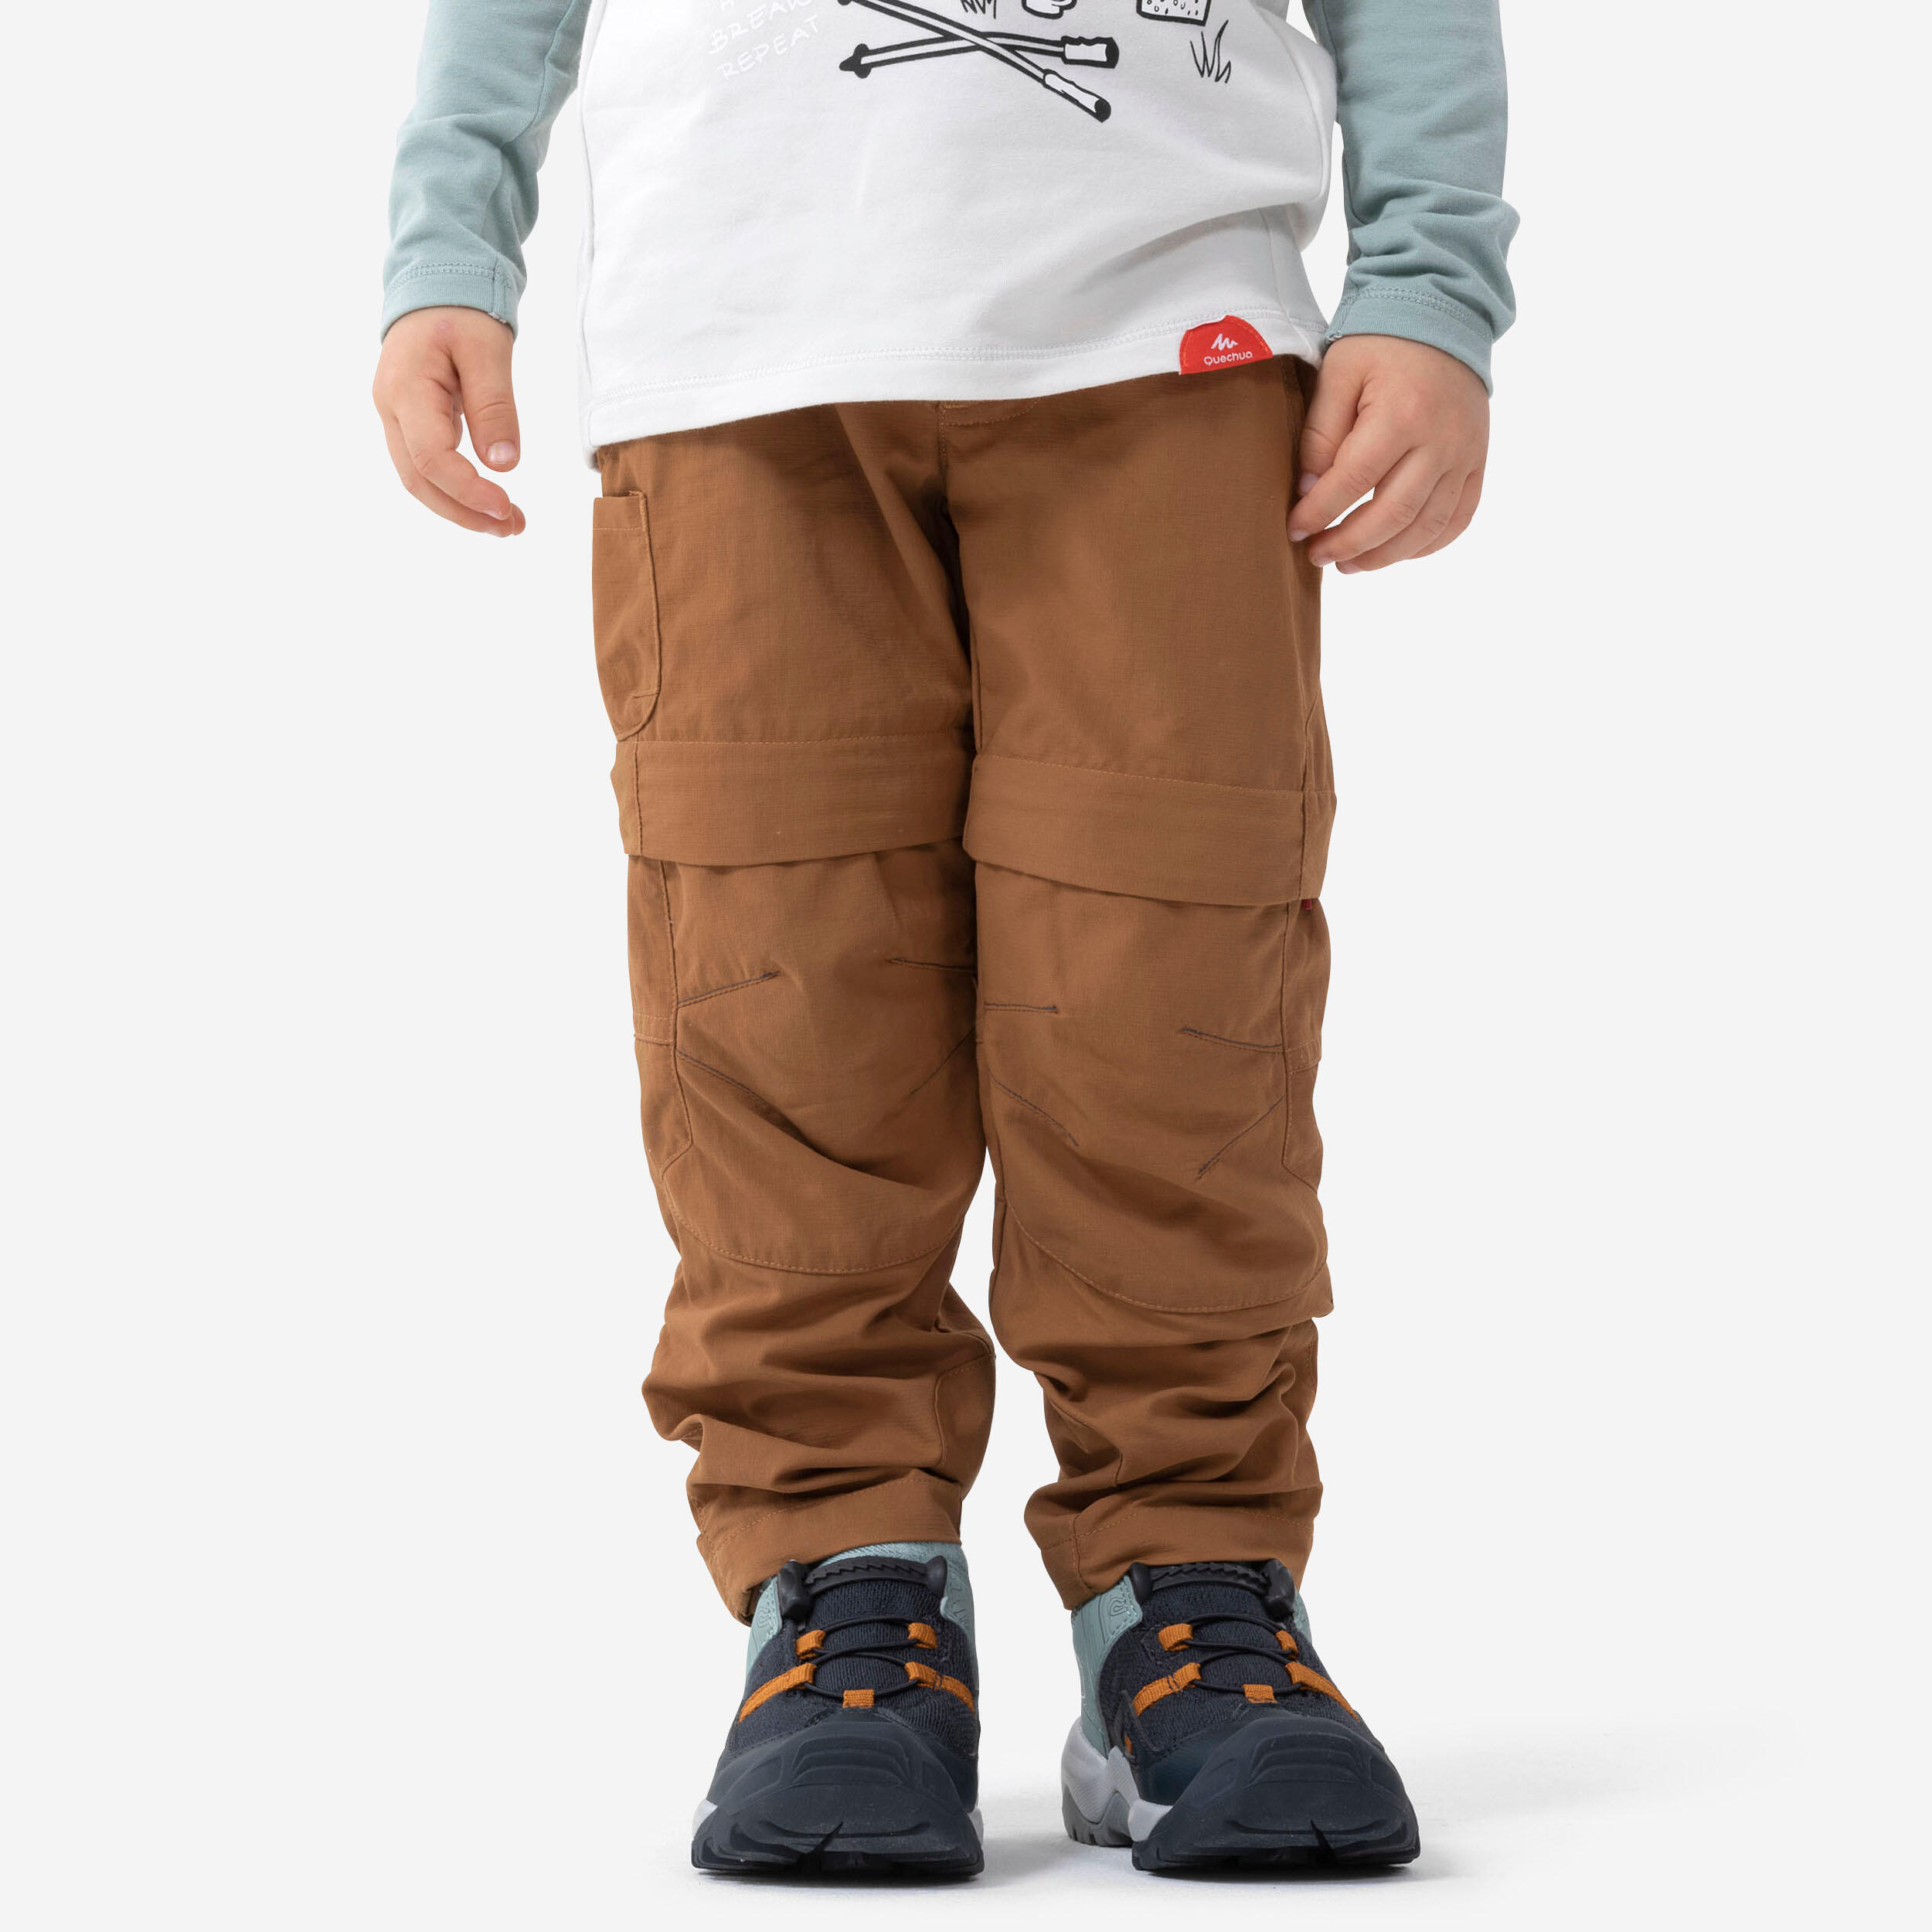 Kids' Hiking Zip-Off Trousers MH500 2-6 Years 1/8